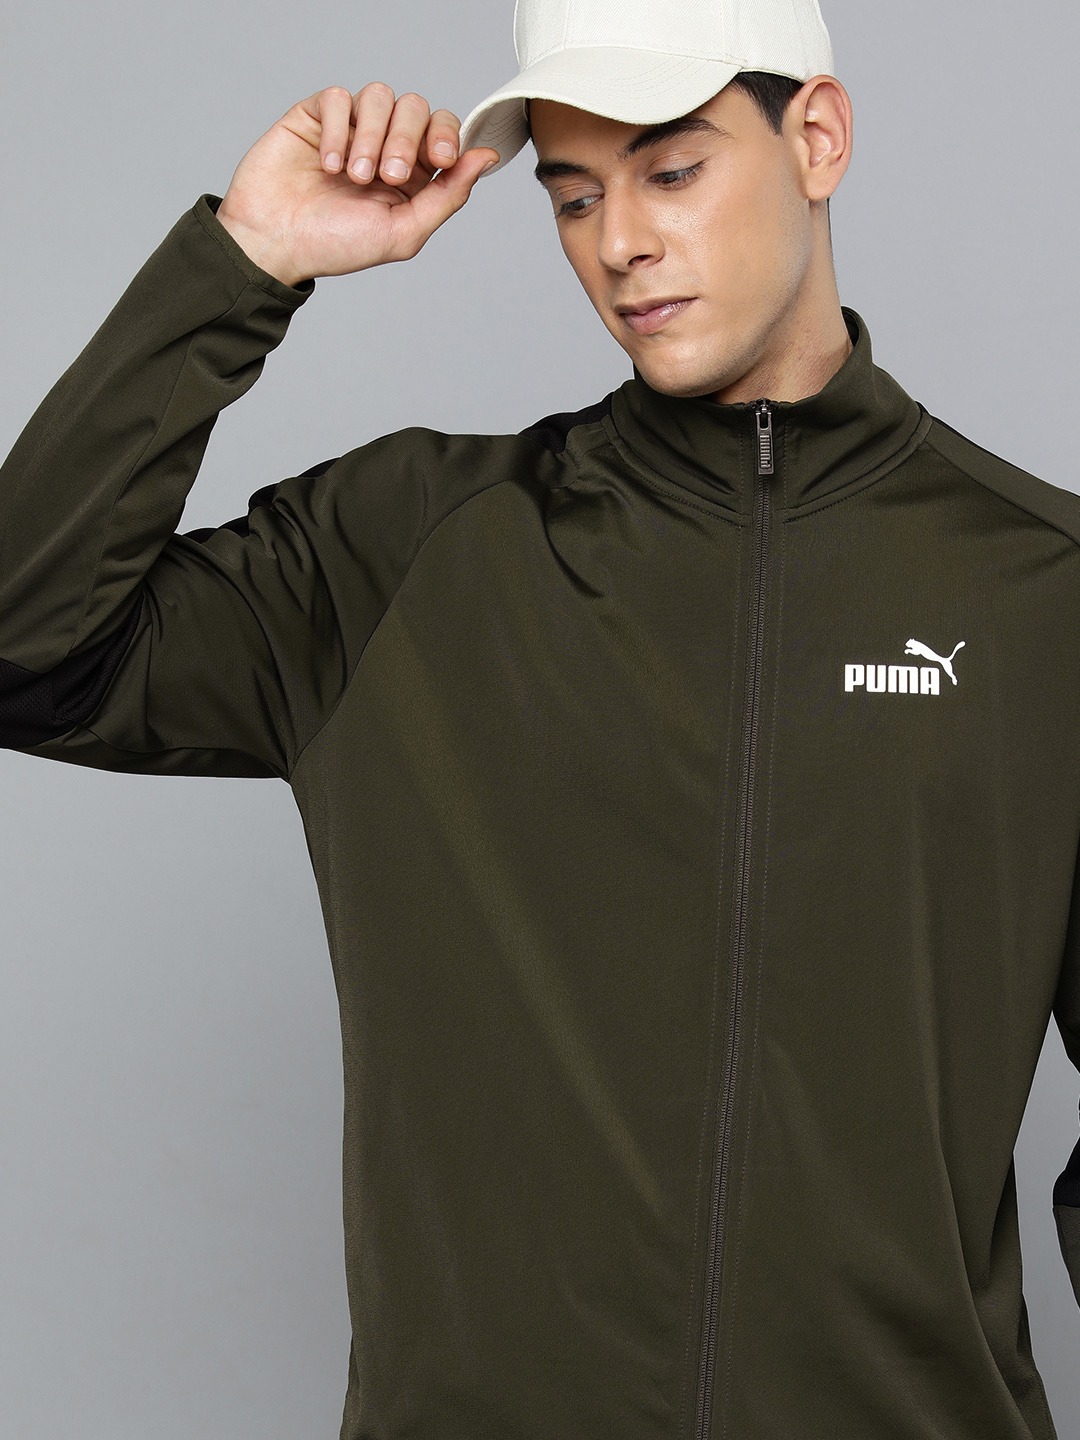 Clothing Tracksuits | Puma Men Olive Green Colourblocked High Neck Casual Tracksuite - IV01679